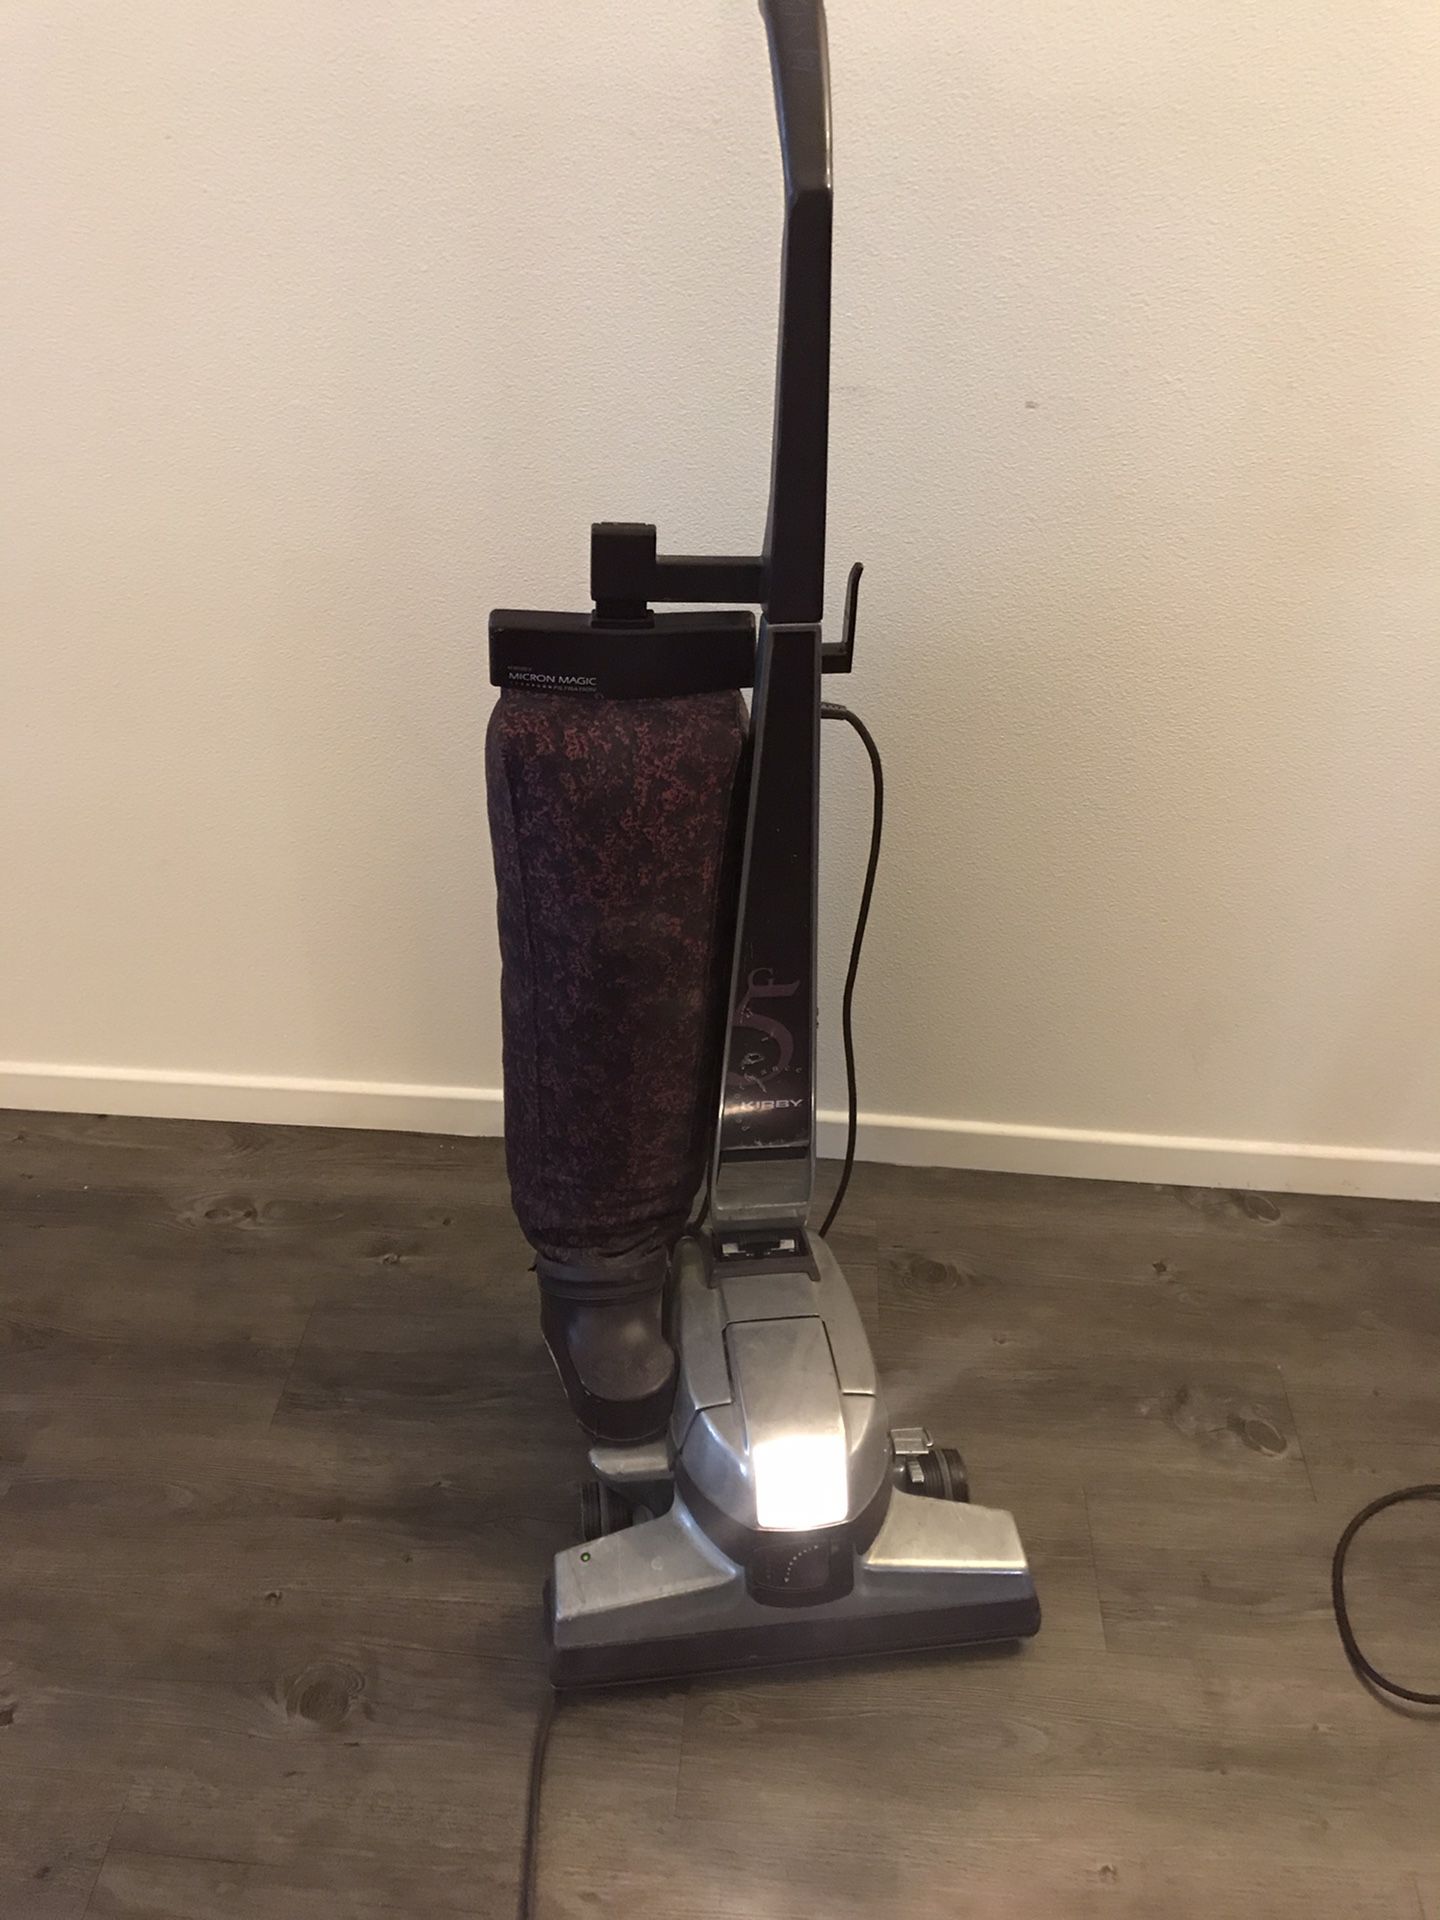 KIRBY Performance G5 Upright Vacuum Cleaner Model G5D